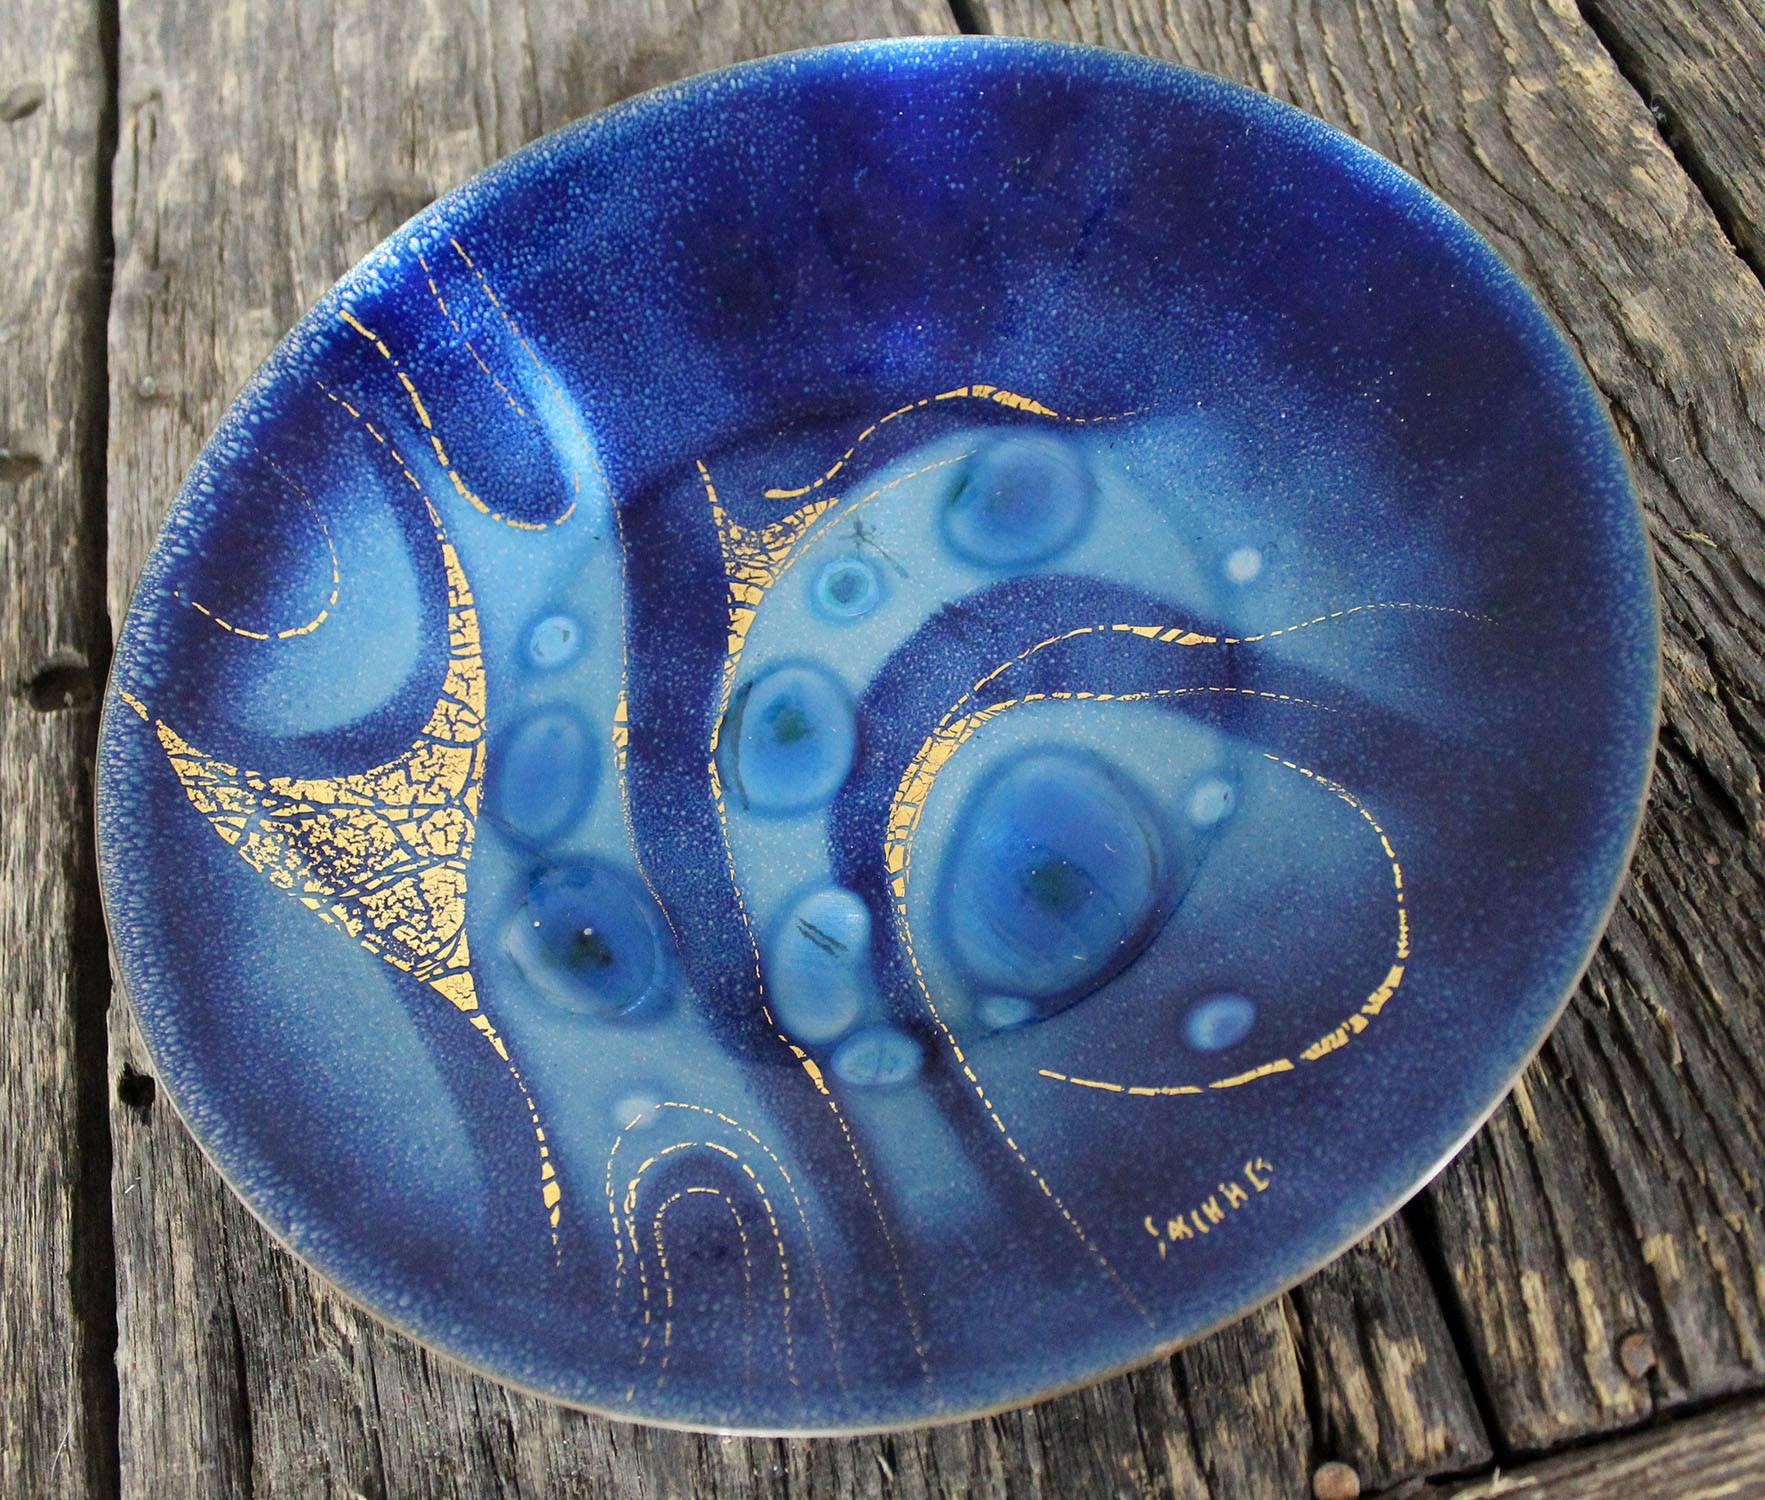 Phenomenal brilliant royal blue enameled plate by Sascha Brastoff. This incredible abstract Mid-Century Modern piece of art is in wonderful vintage condition. Signed on the front Sasha B and, circa 1950s-1960s.

Gorgeous! This incredible enamel